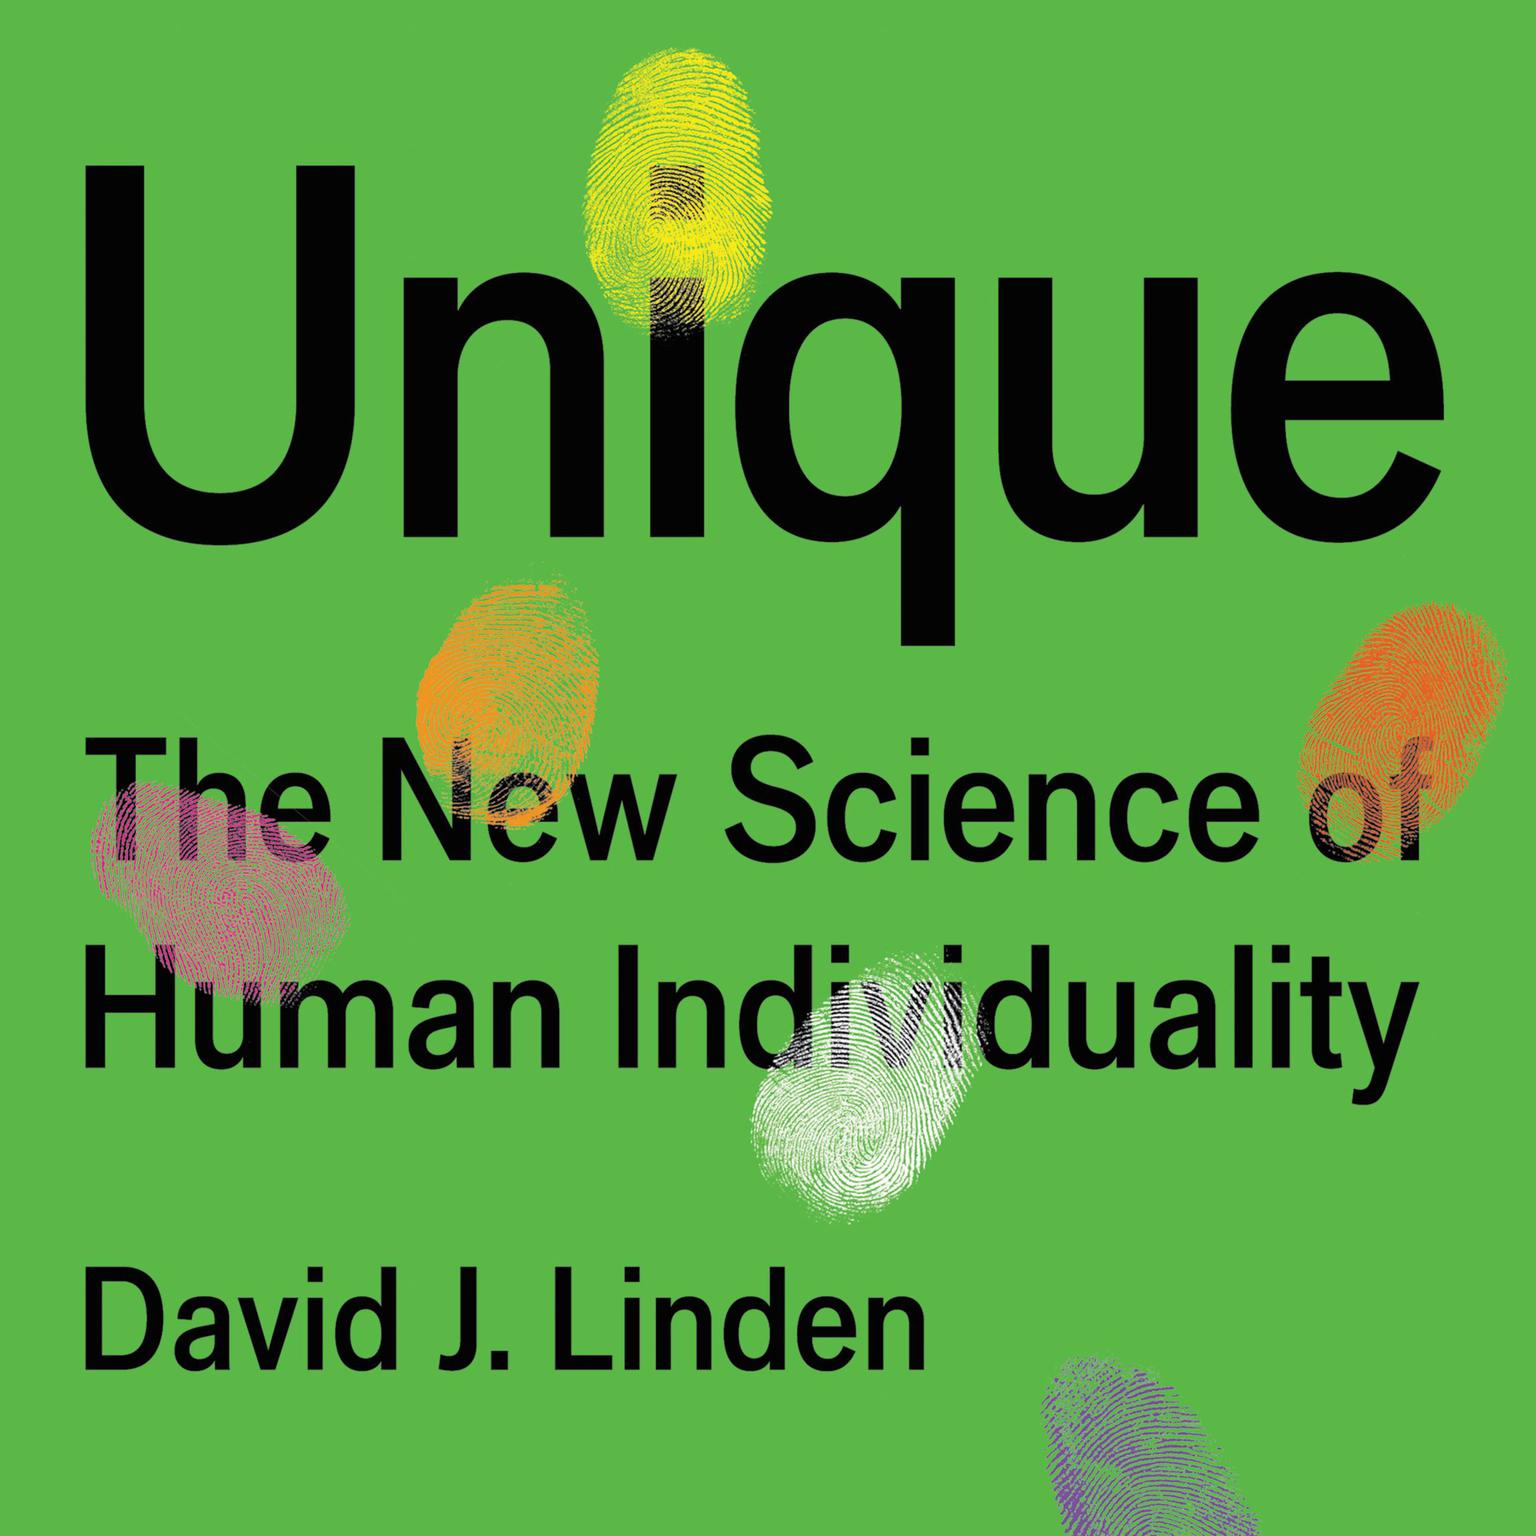 Unique: The New Science of Human Individuality Audiobook, by David J. Linden